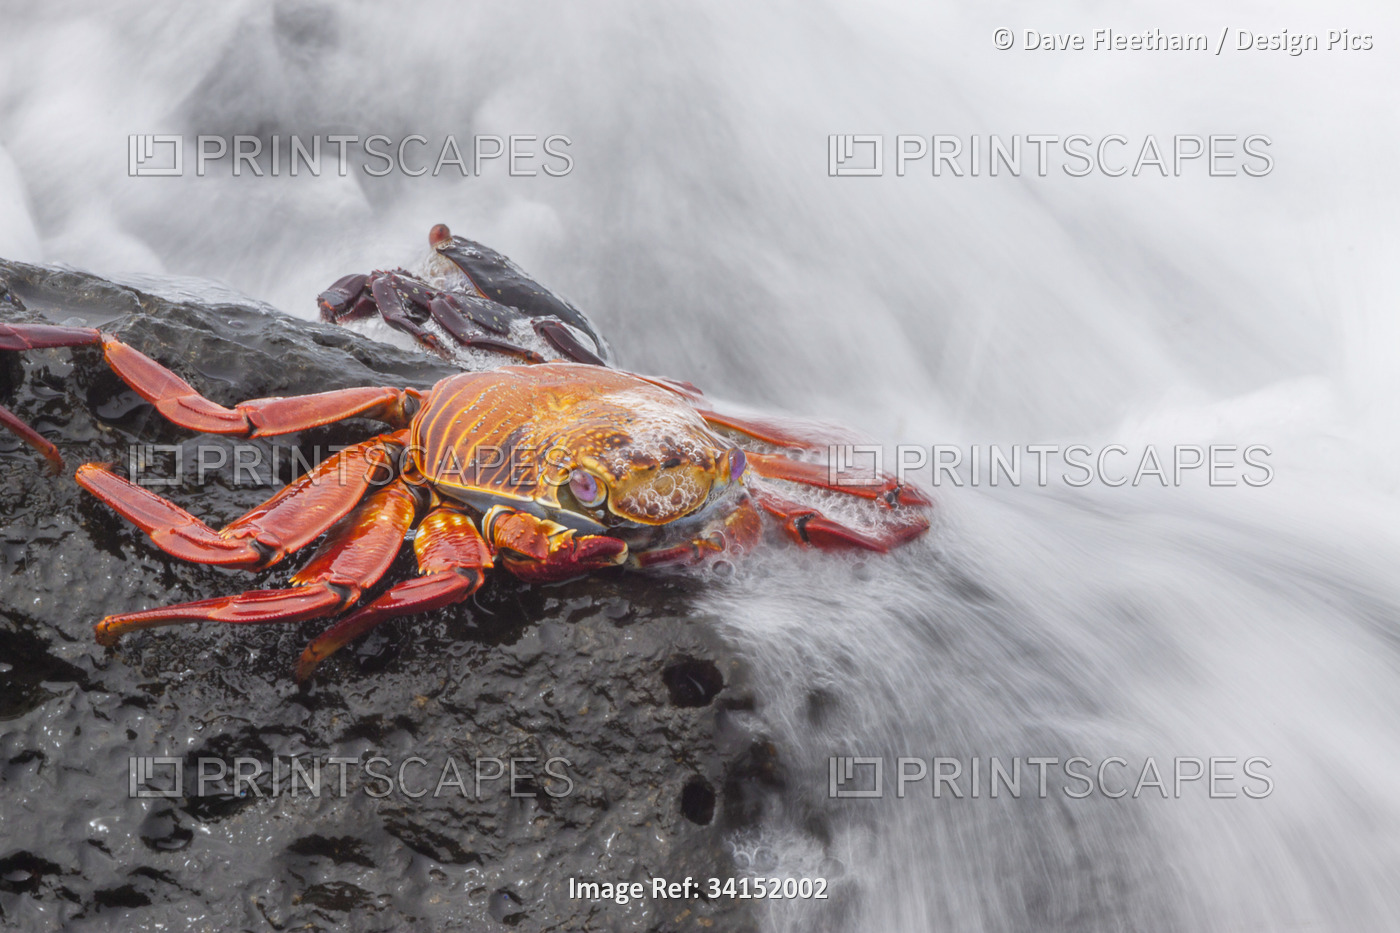 A wave washes over a Sally Lightfoot Crab (Graspus graspus) searching for algae ...